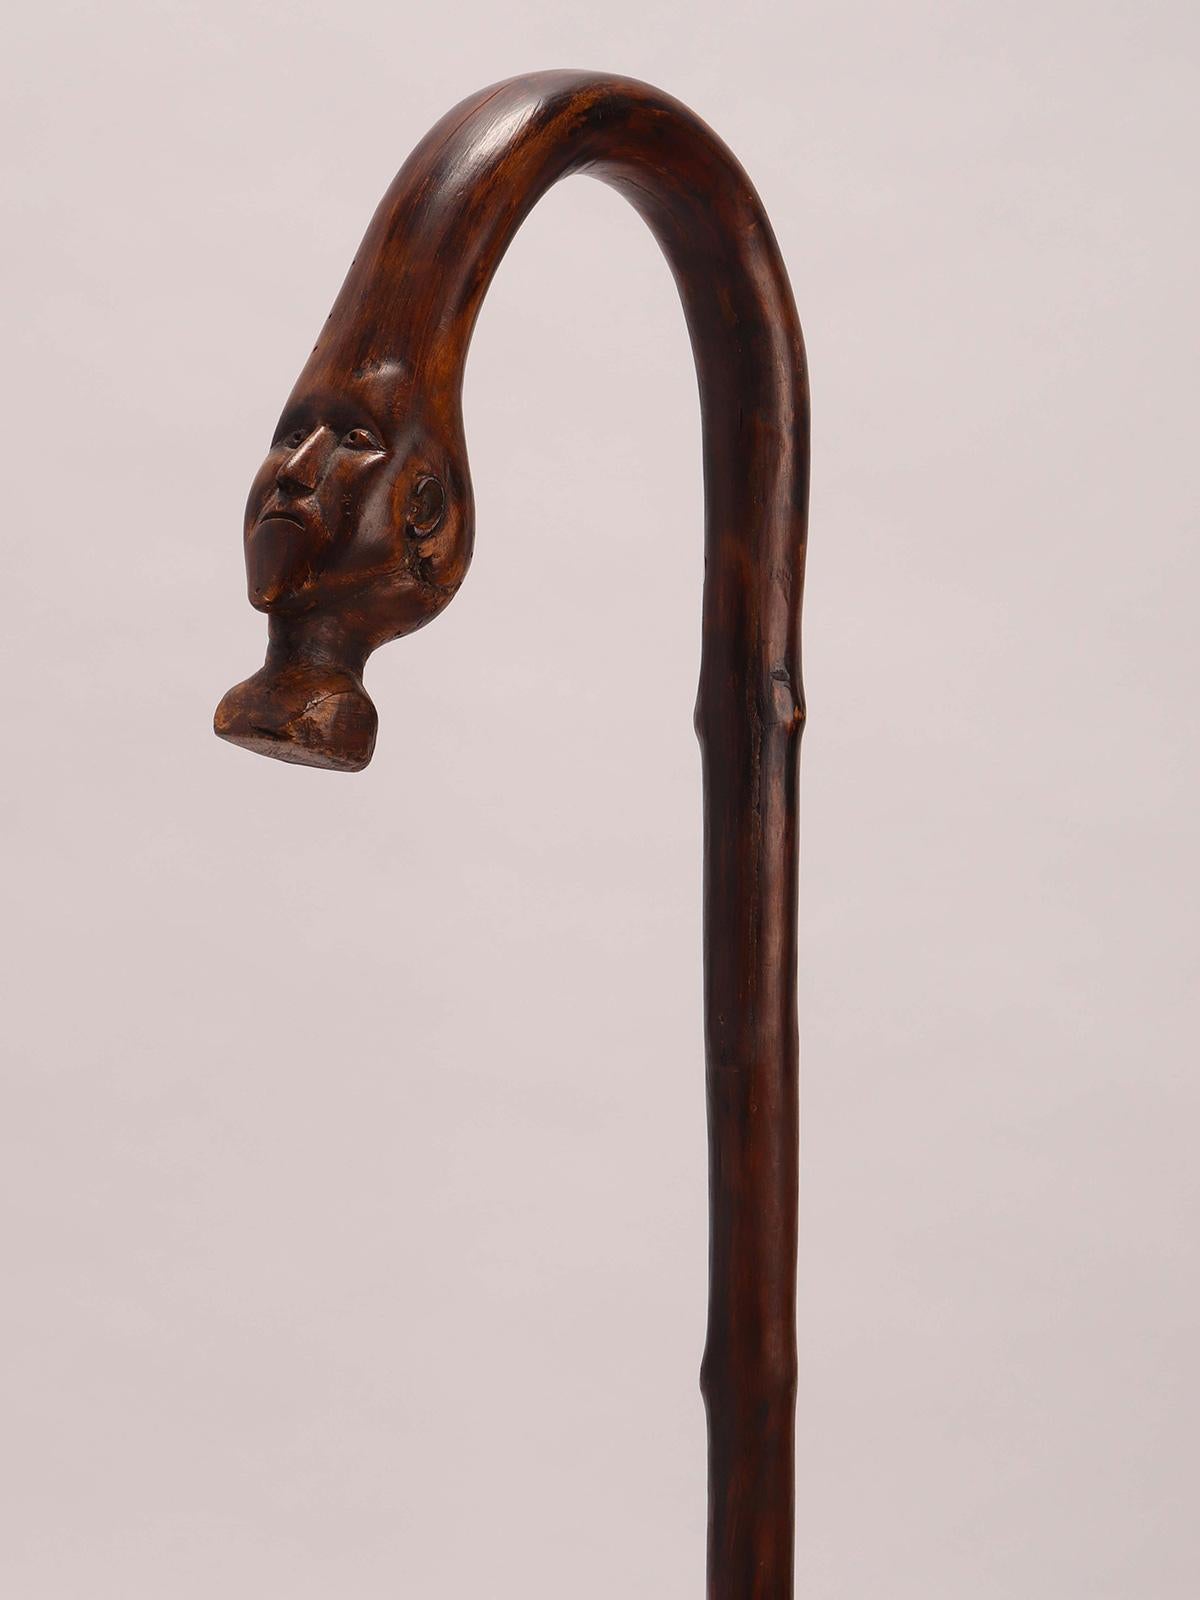 Fruitwood Folk art  walking stick depicting the head of a man, USA 1880.  For Sale